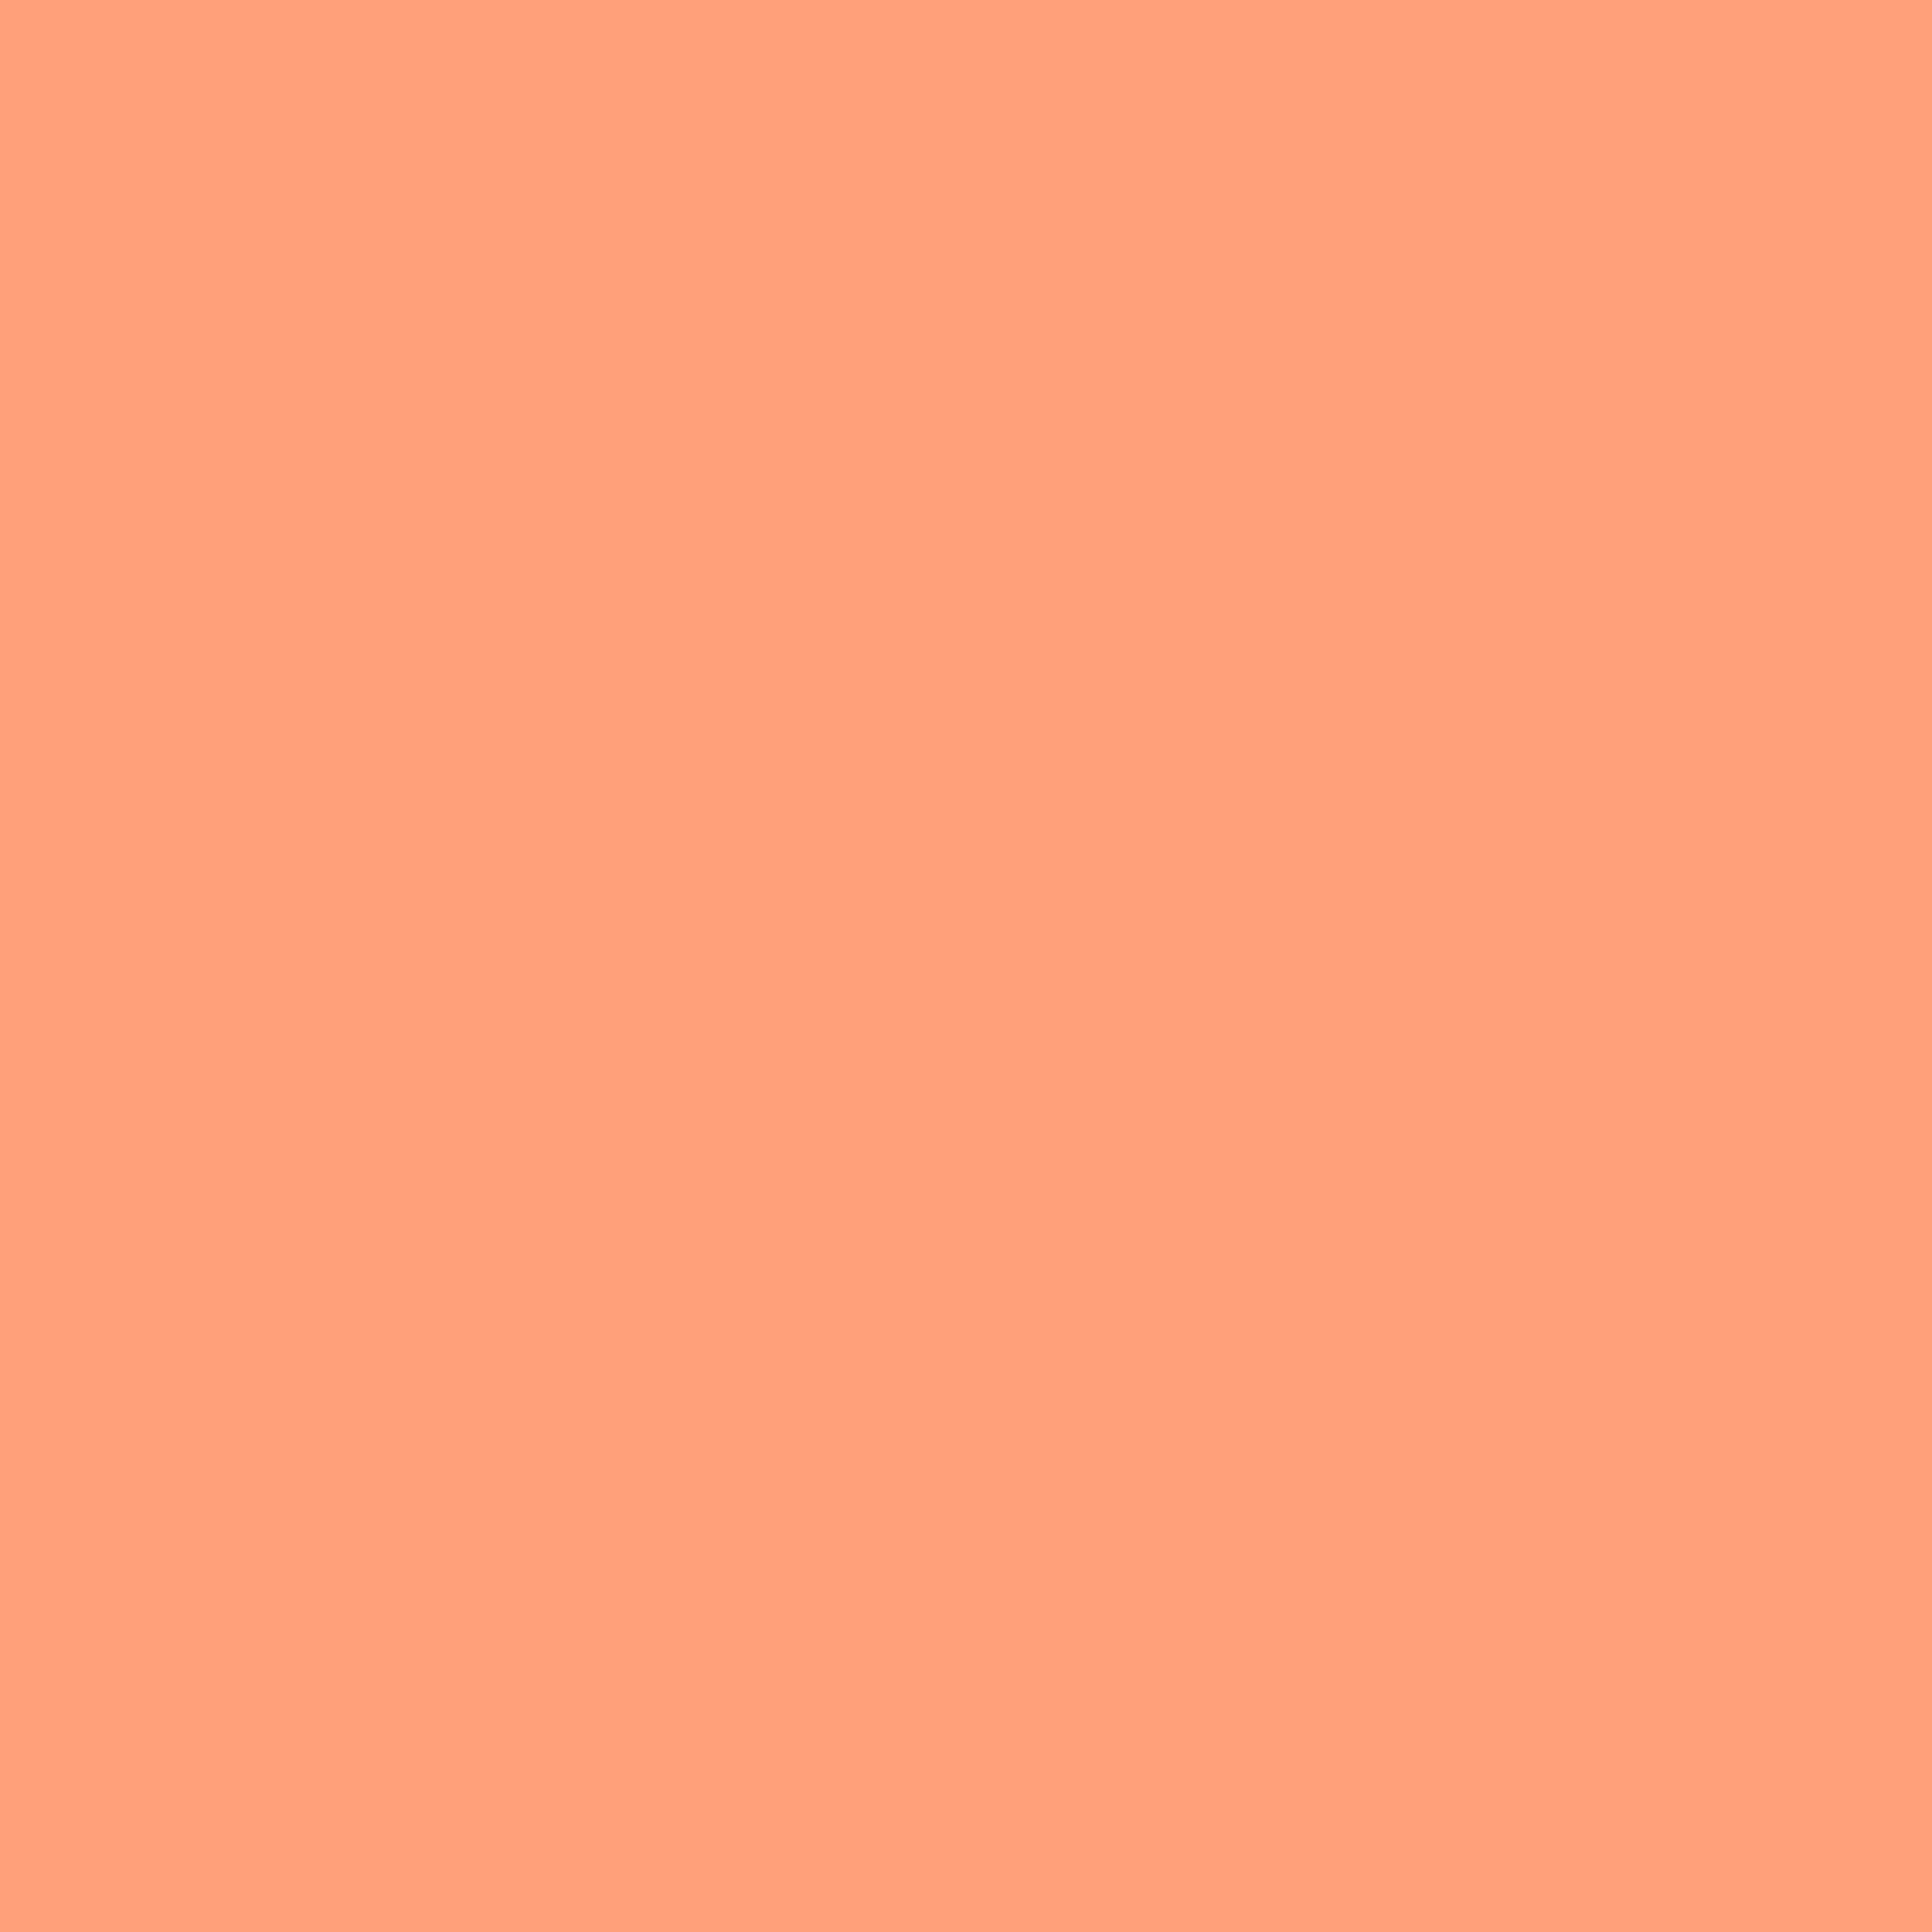 2732x2732 Light Salmon Solid Color Background